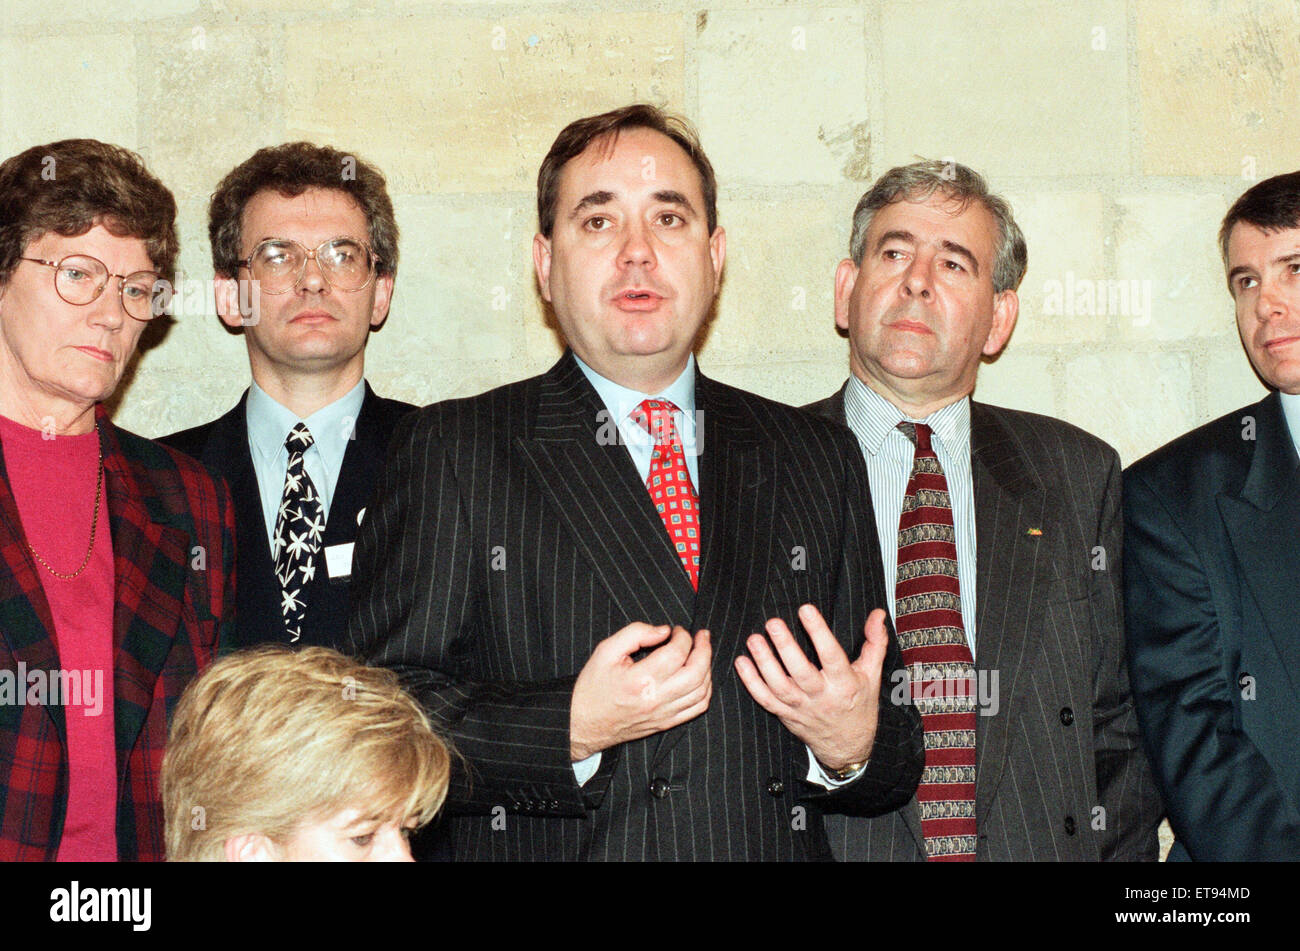 MPs, including SNP's Alex Salmond, who support ban on firearms after the Dunblane massacre team up with police and children's parents to call for a full ban. 12th November 1996. Stock Photo